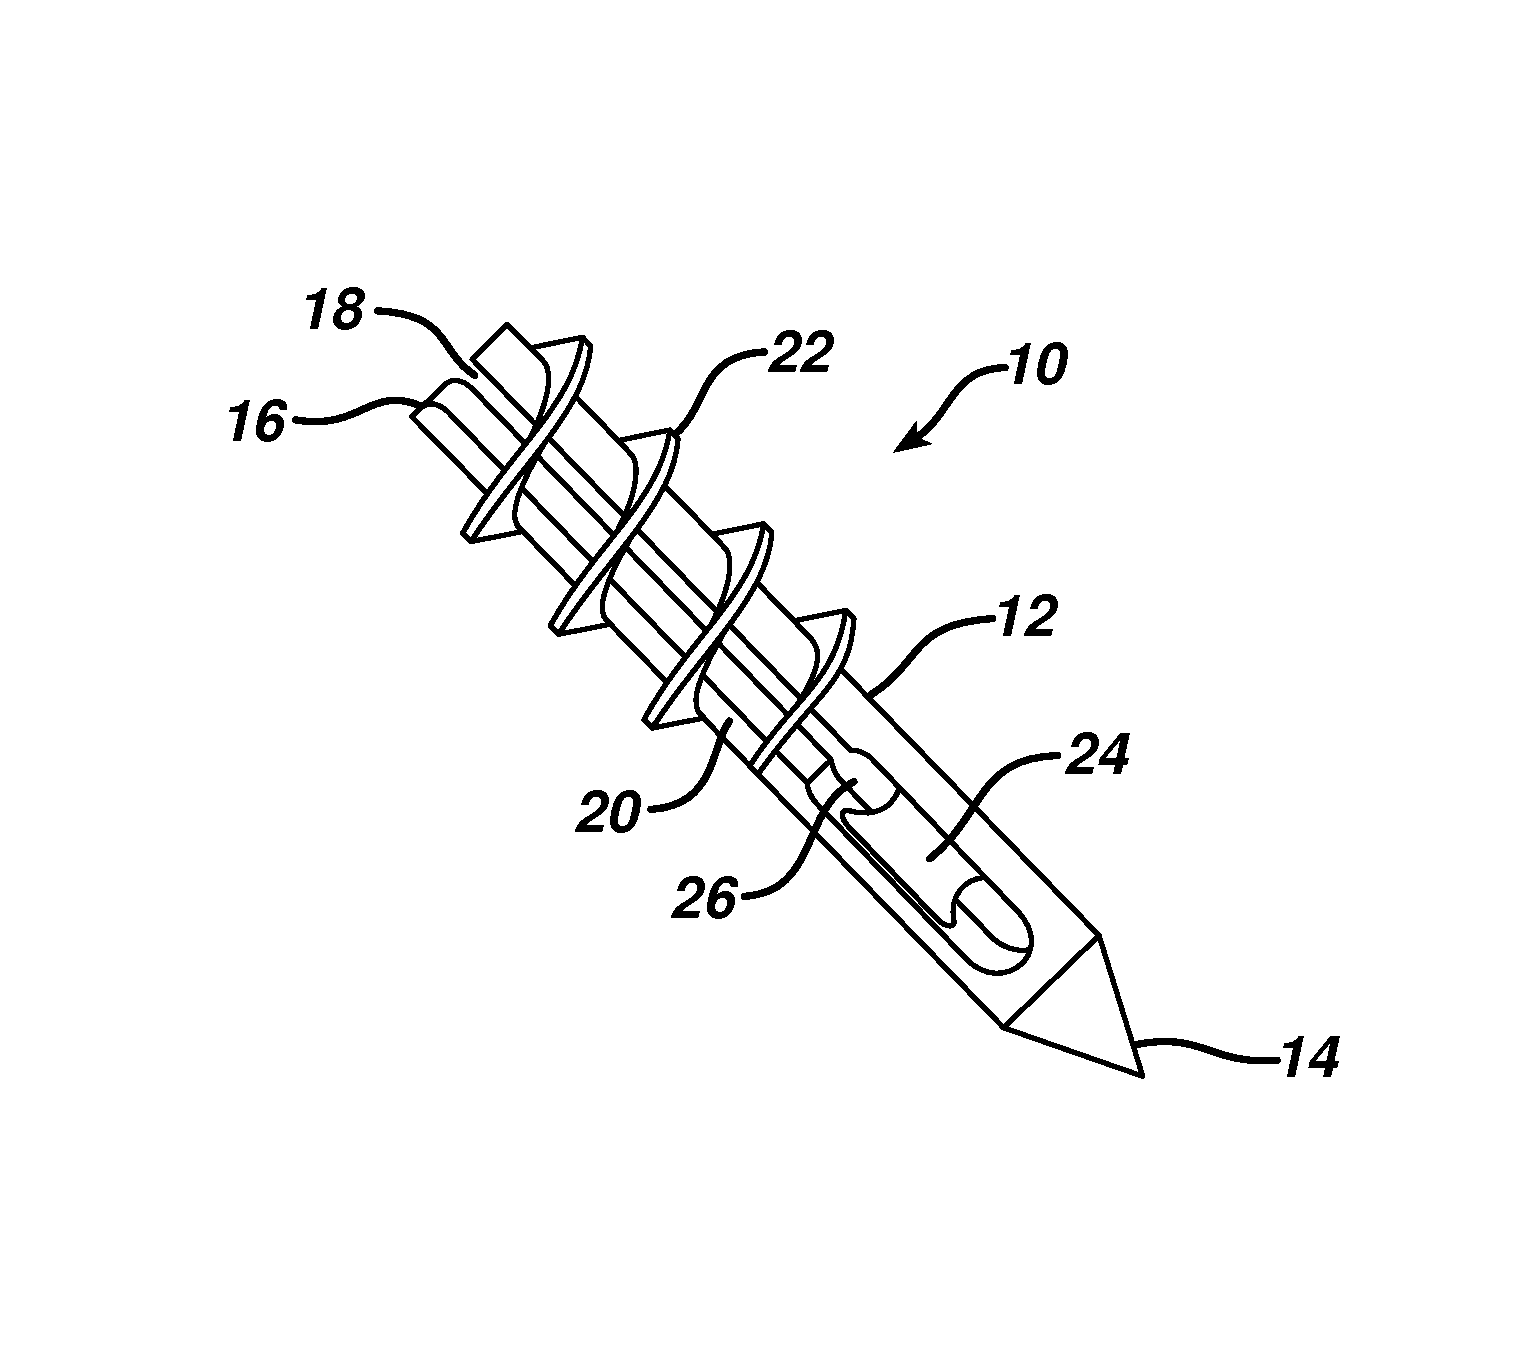 Partial thickness rotator cuff repair system and method